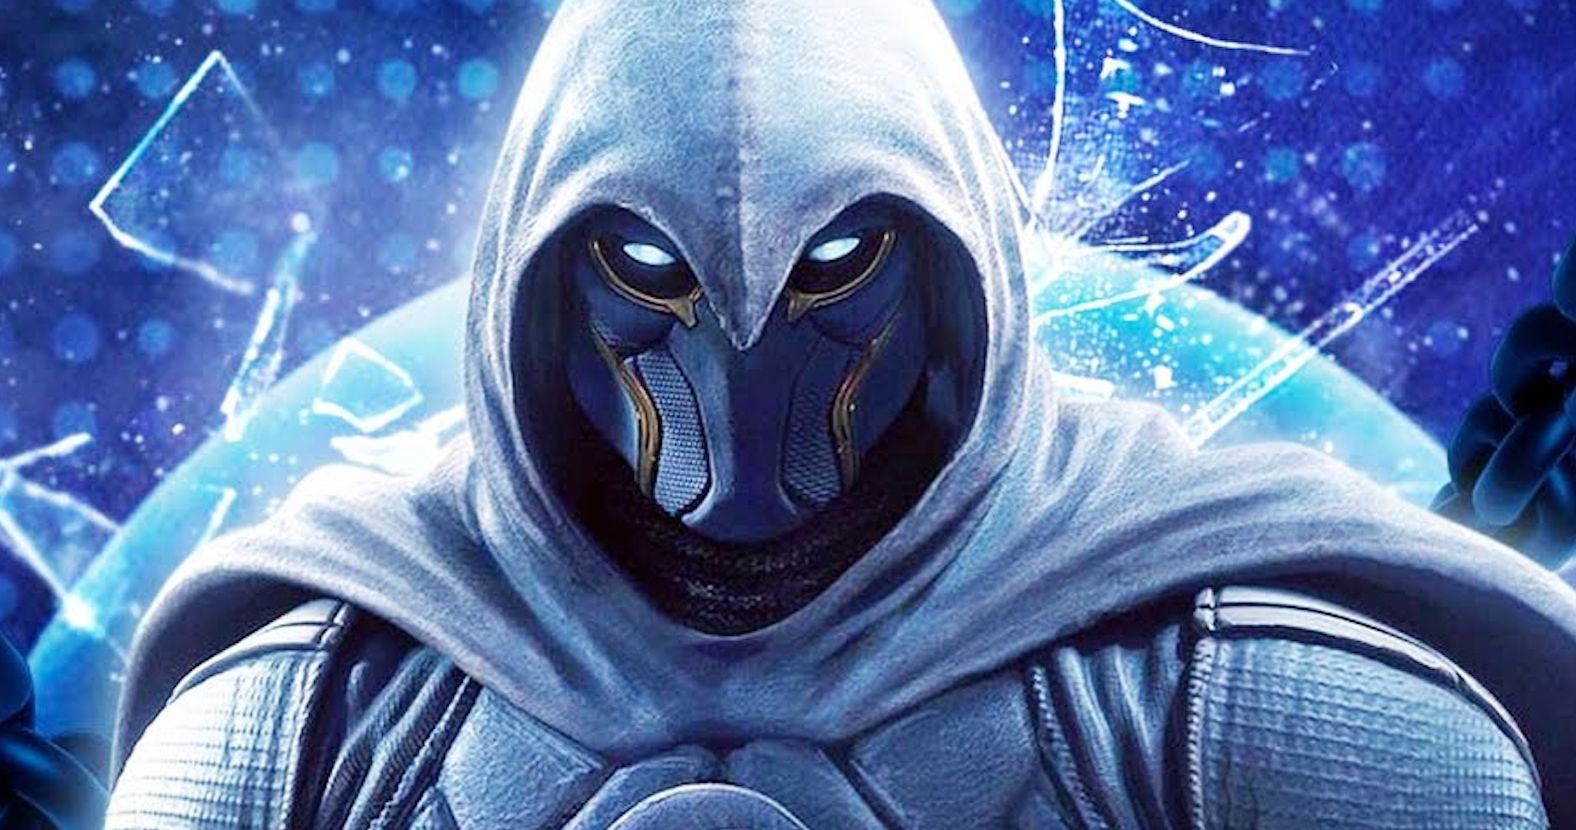 Creepy New Moon Knight Concept Art Released by Marvel